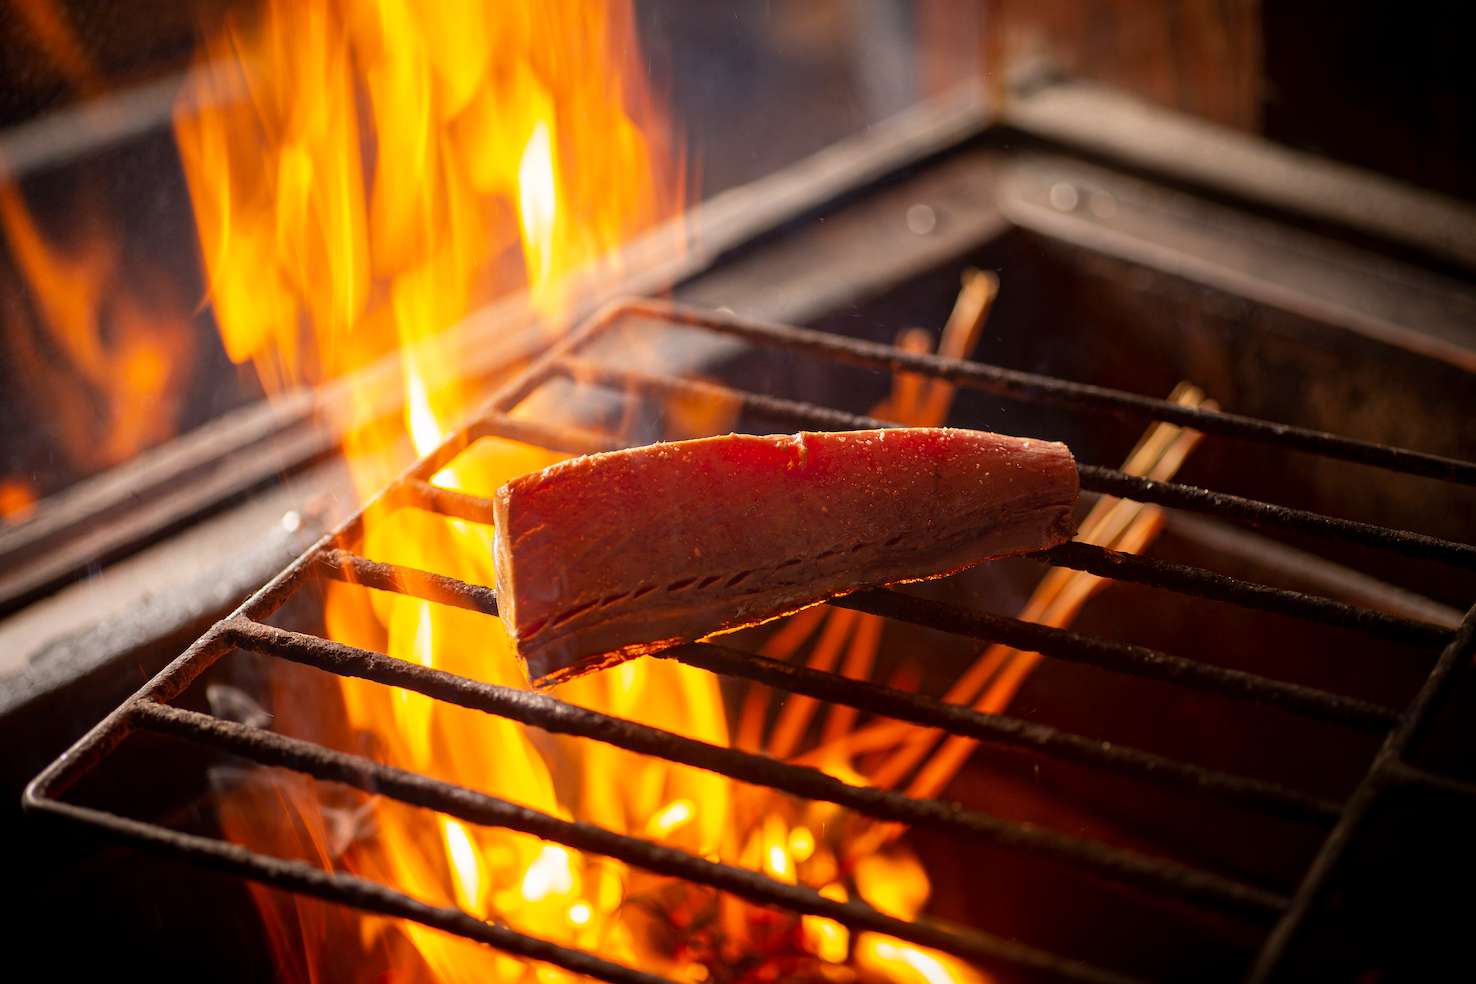 Smoke with a powerful fire of straw! Don't miss the flavor of bonito